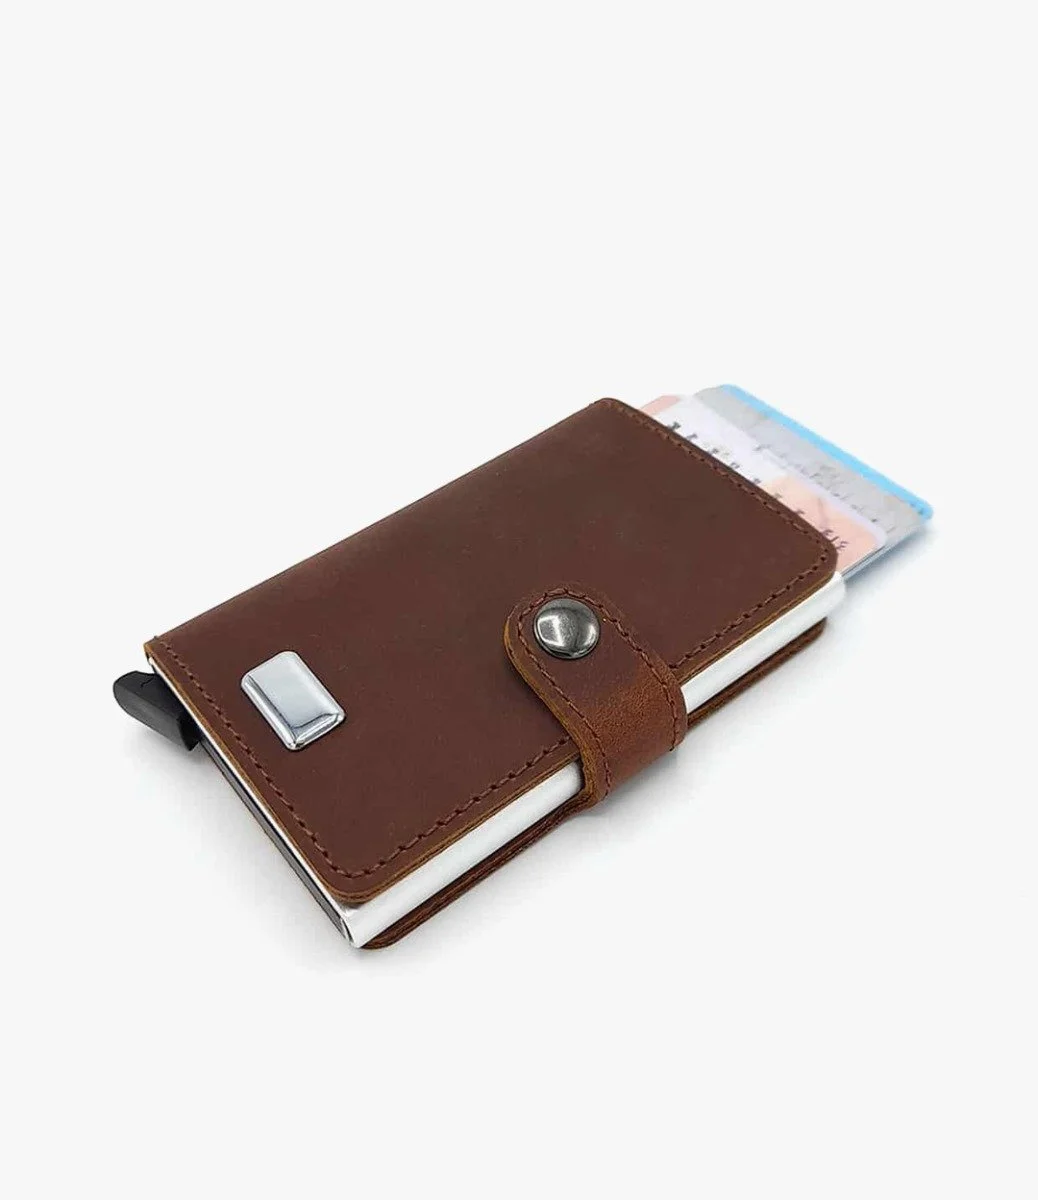 Anti-theft “RFID” Mecal Wallet and Card Holder-genuine leather with lock